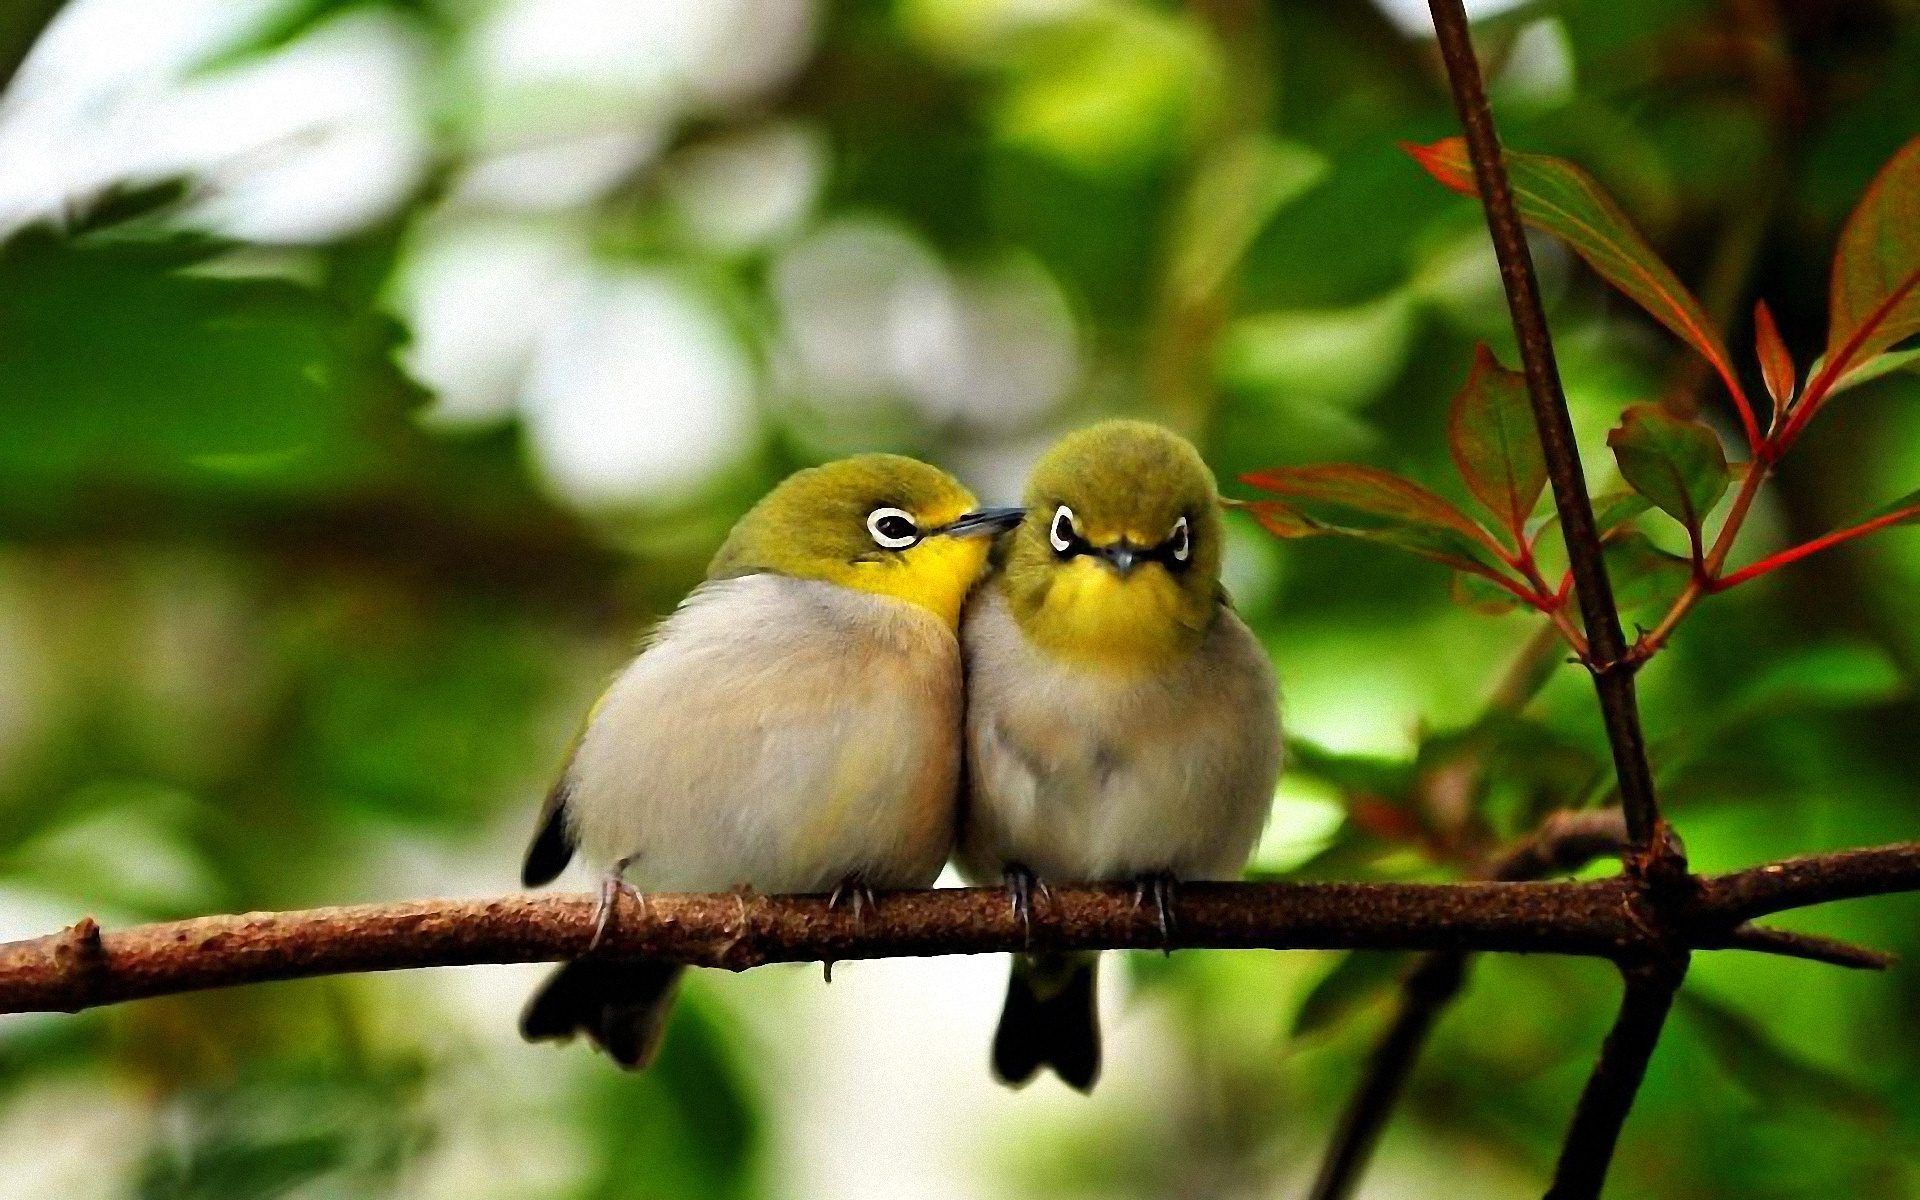 800x1280 Cute Birds Artwork 4k Nexus 7Samsung Galaxy Tab 10Note Android  Tablets HD 4k Wallpapers Images Backgrounds Photos and Pictures